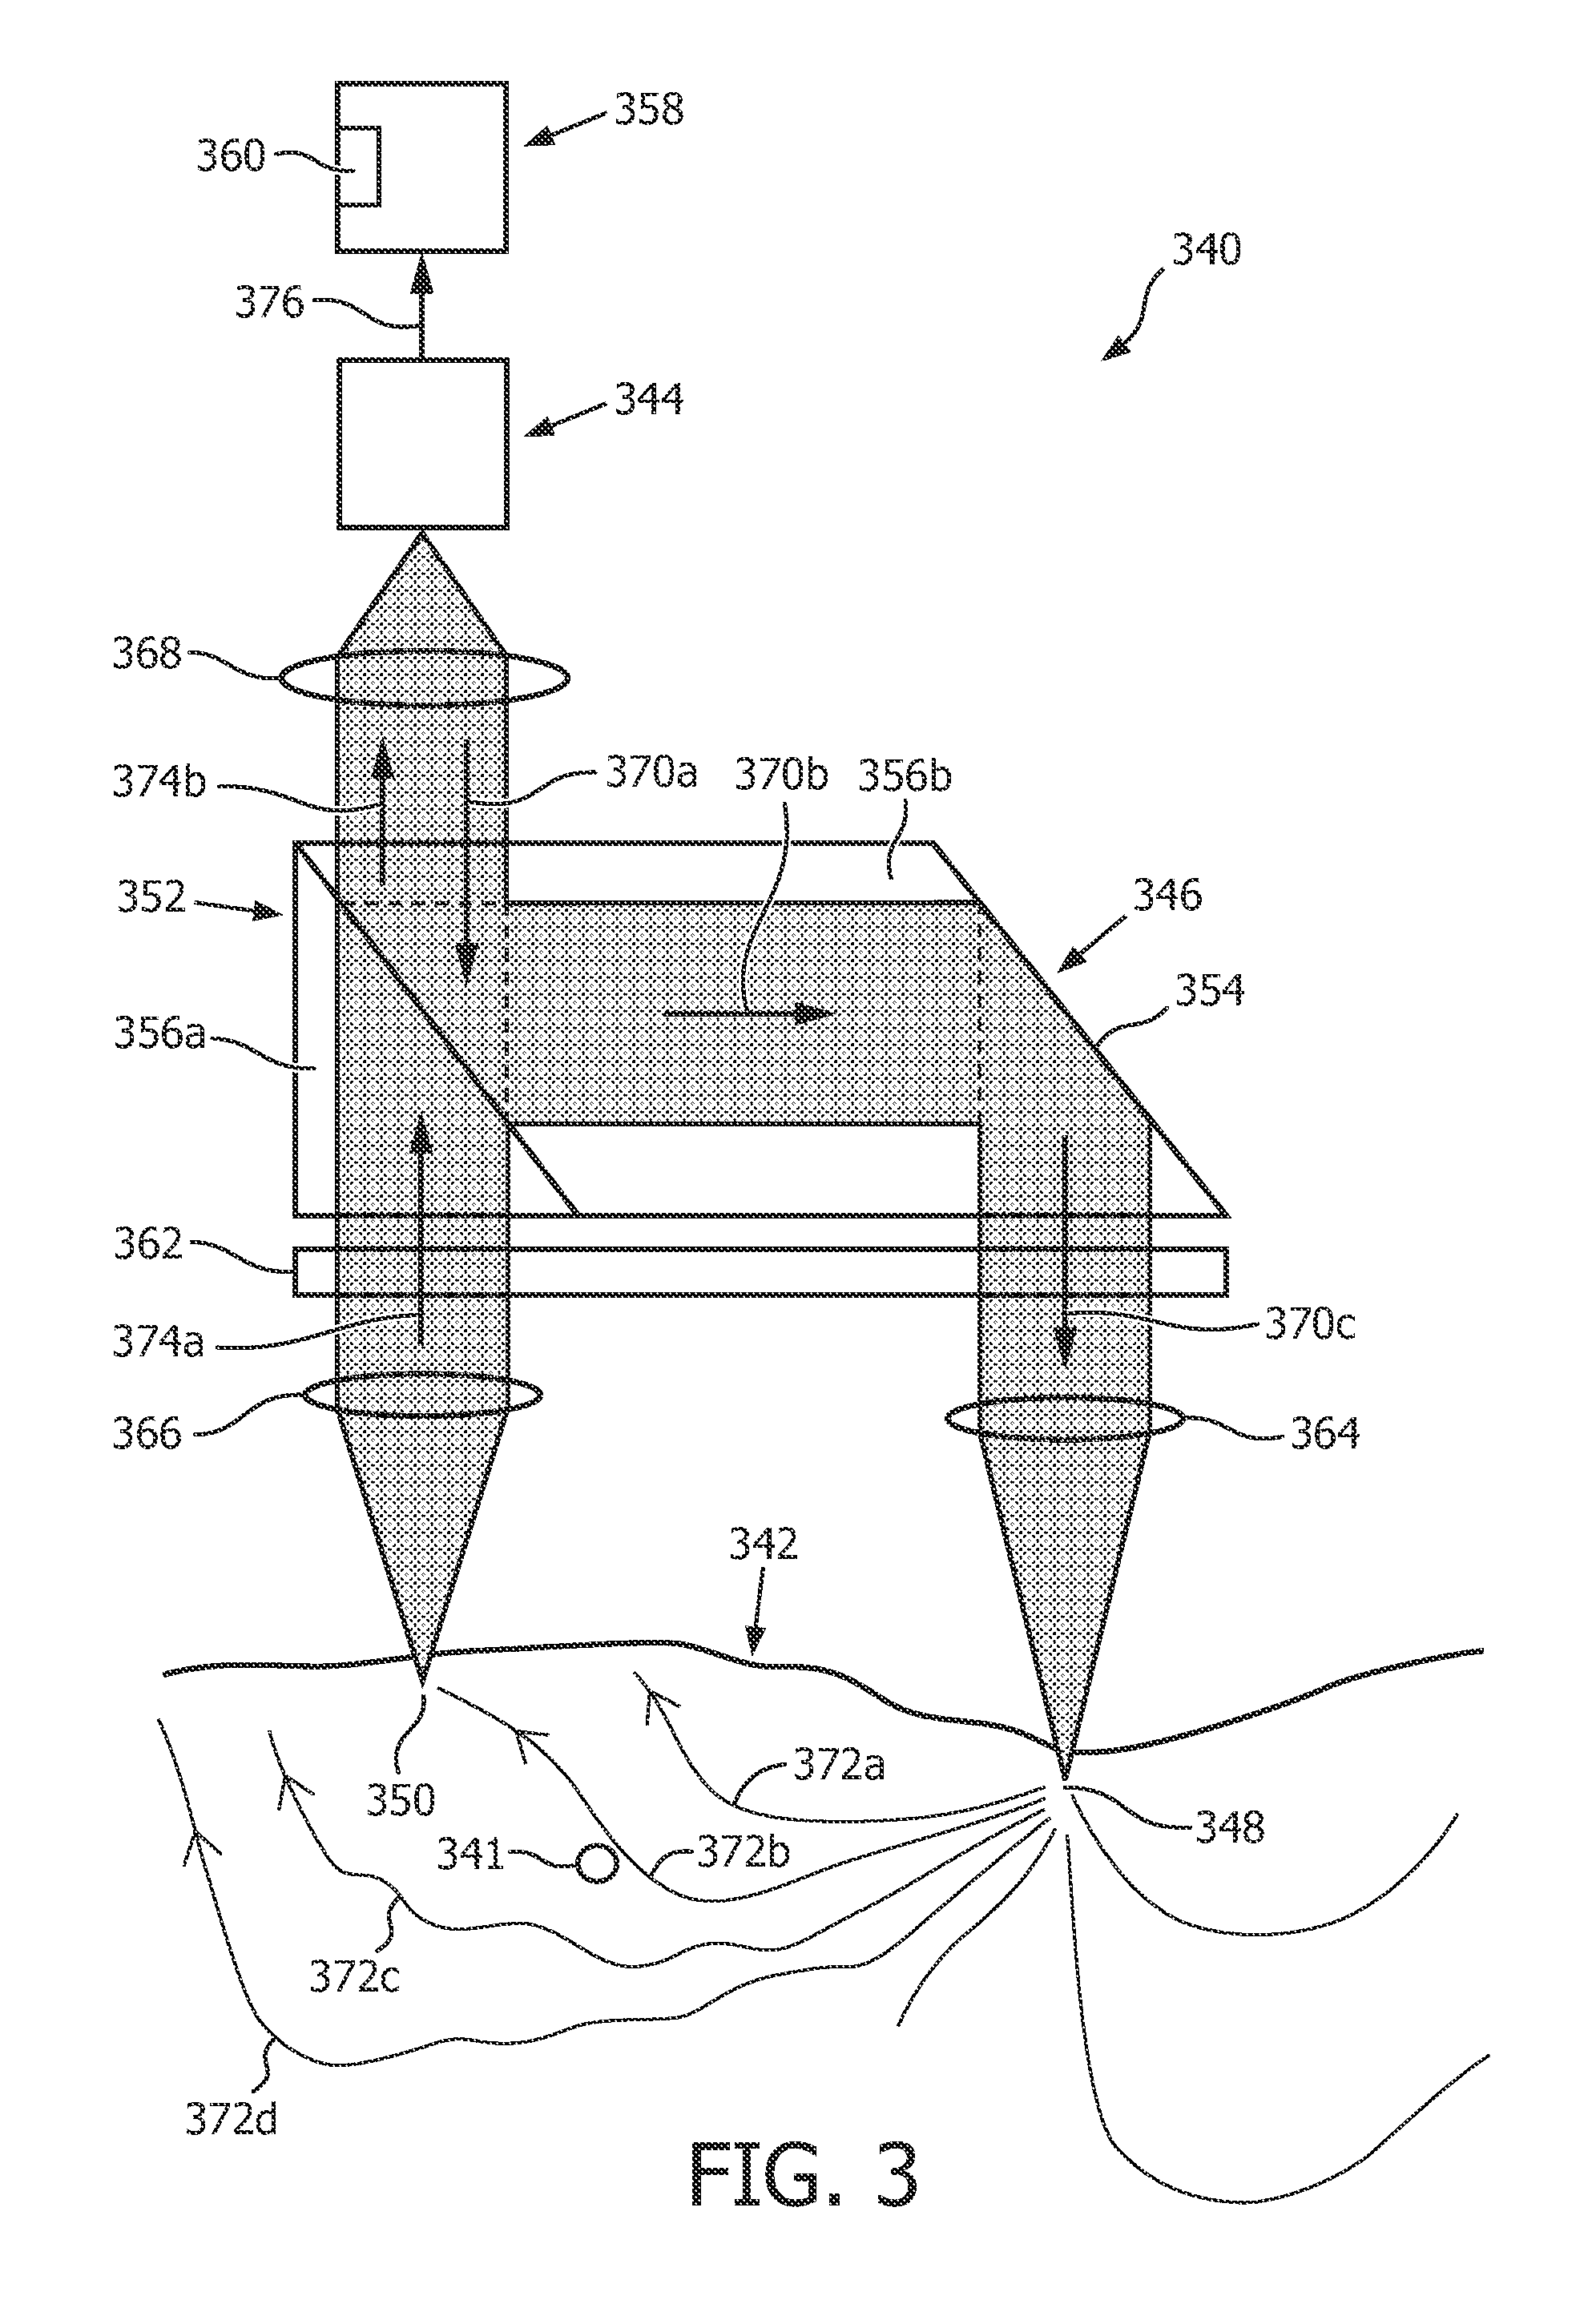 Determining a flow characteristic of an object being movable in an element